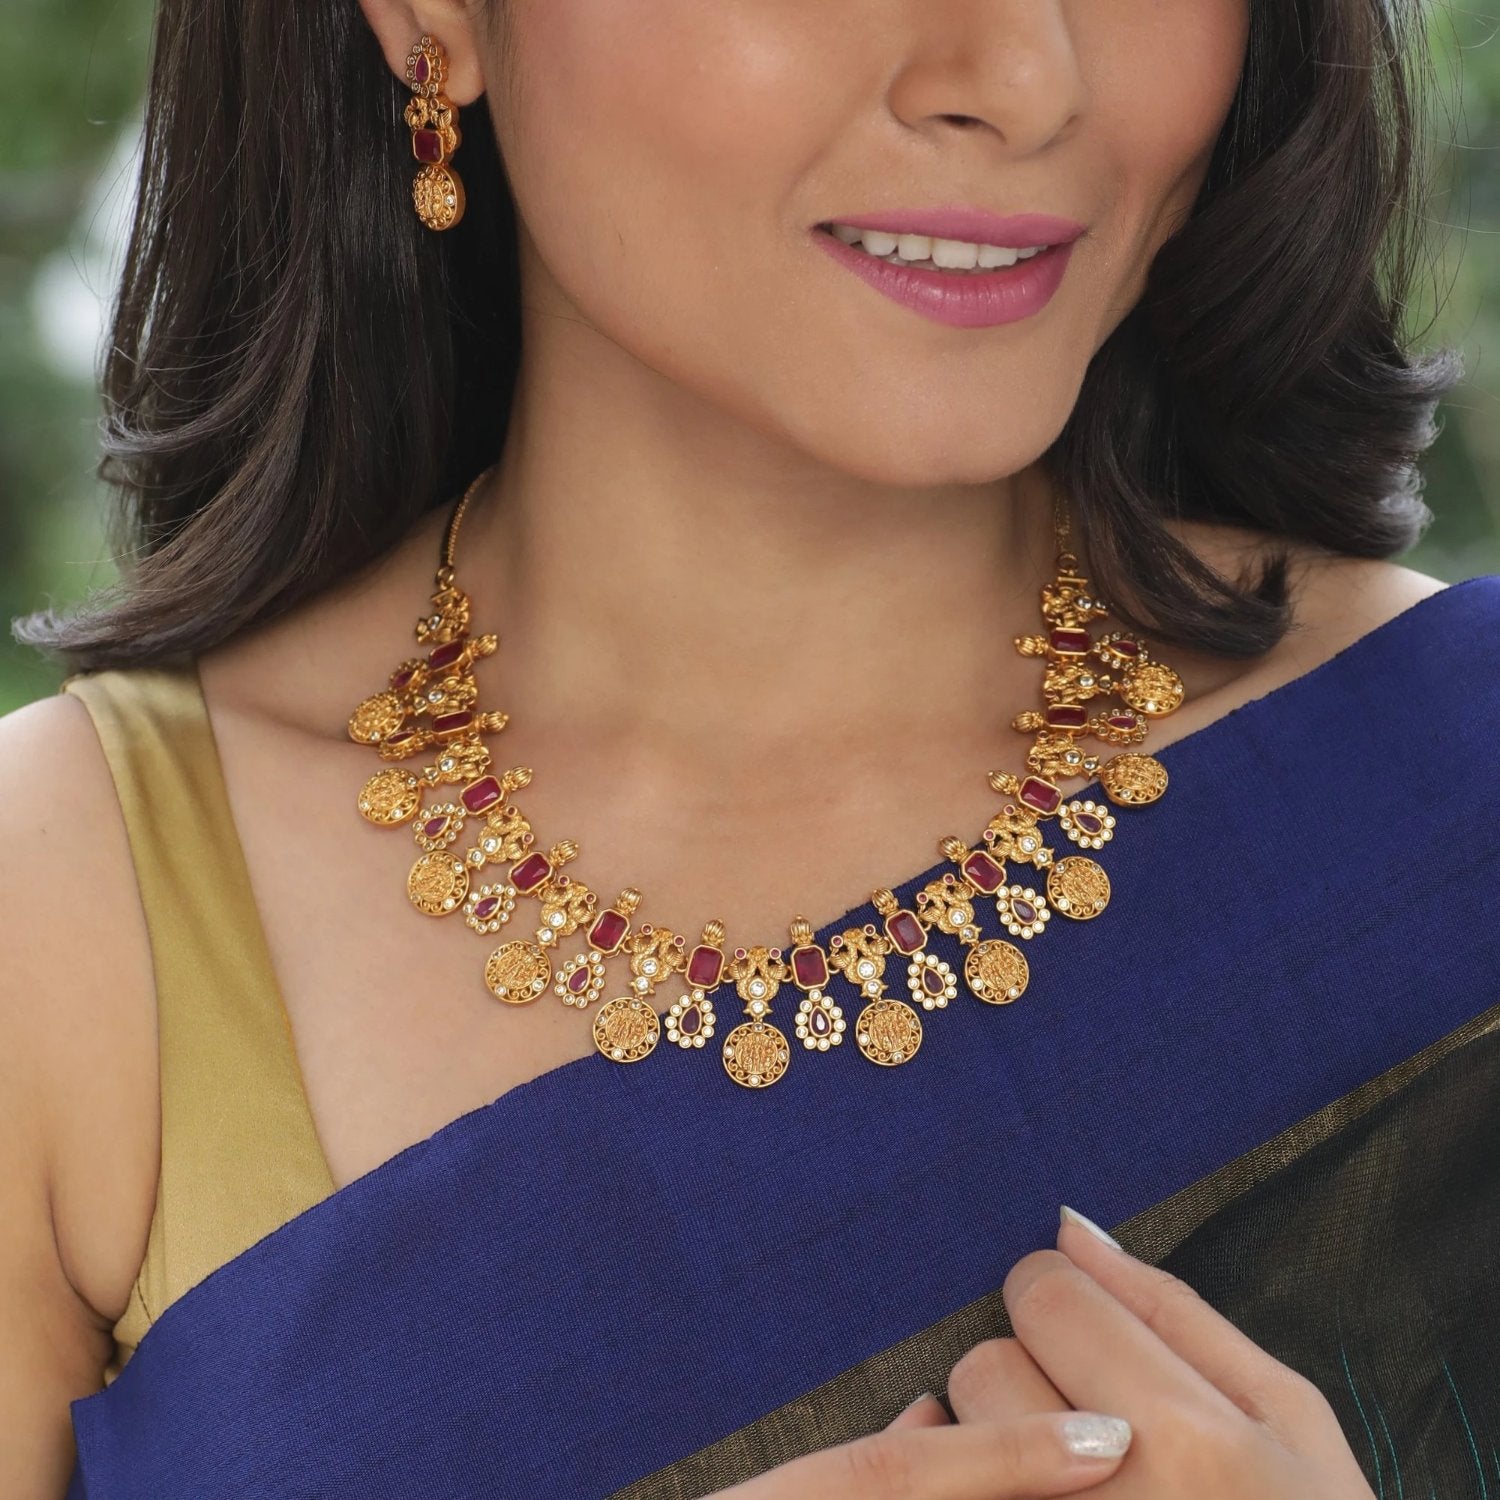 A picture of an Indian artificial necklace and earring set. The set is gold-toned with floral designs and green gemstones.